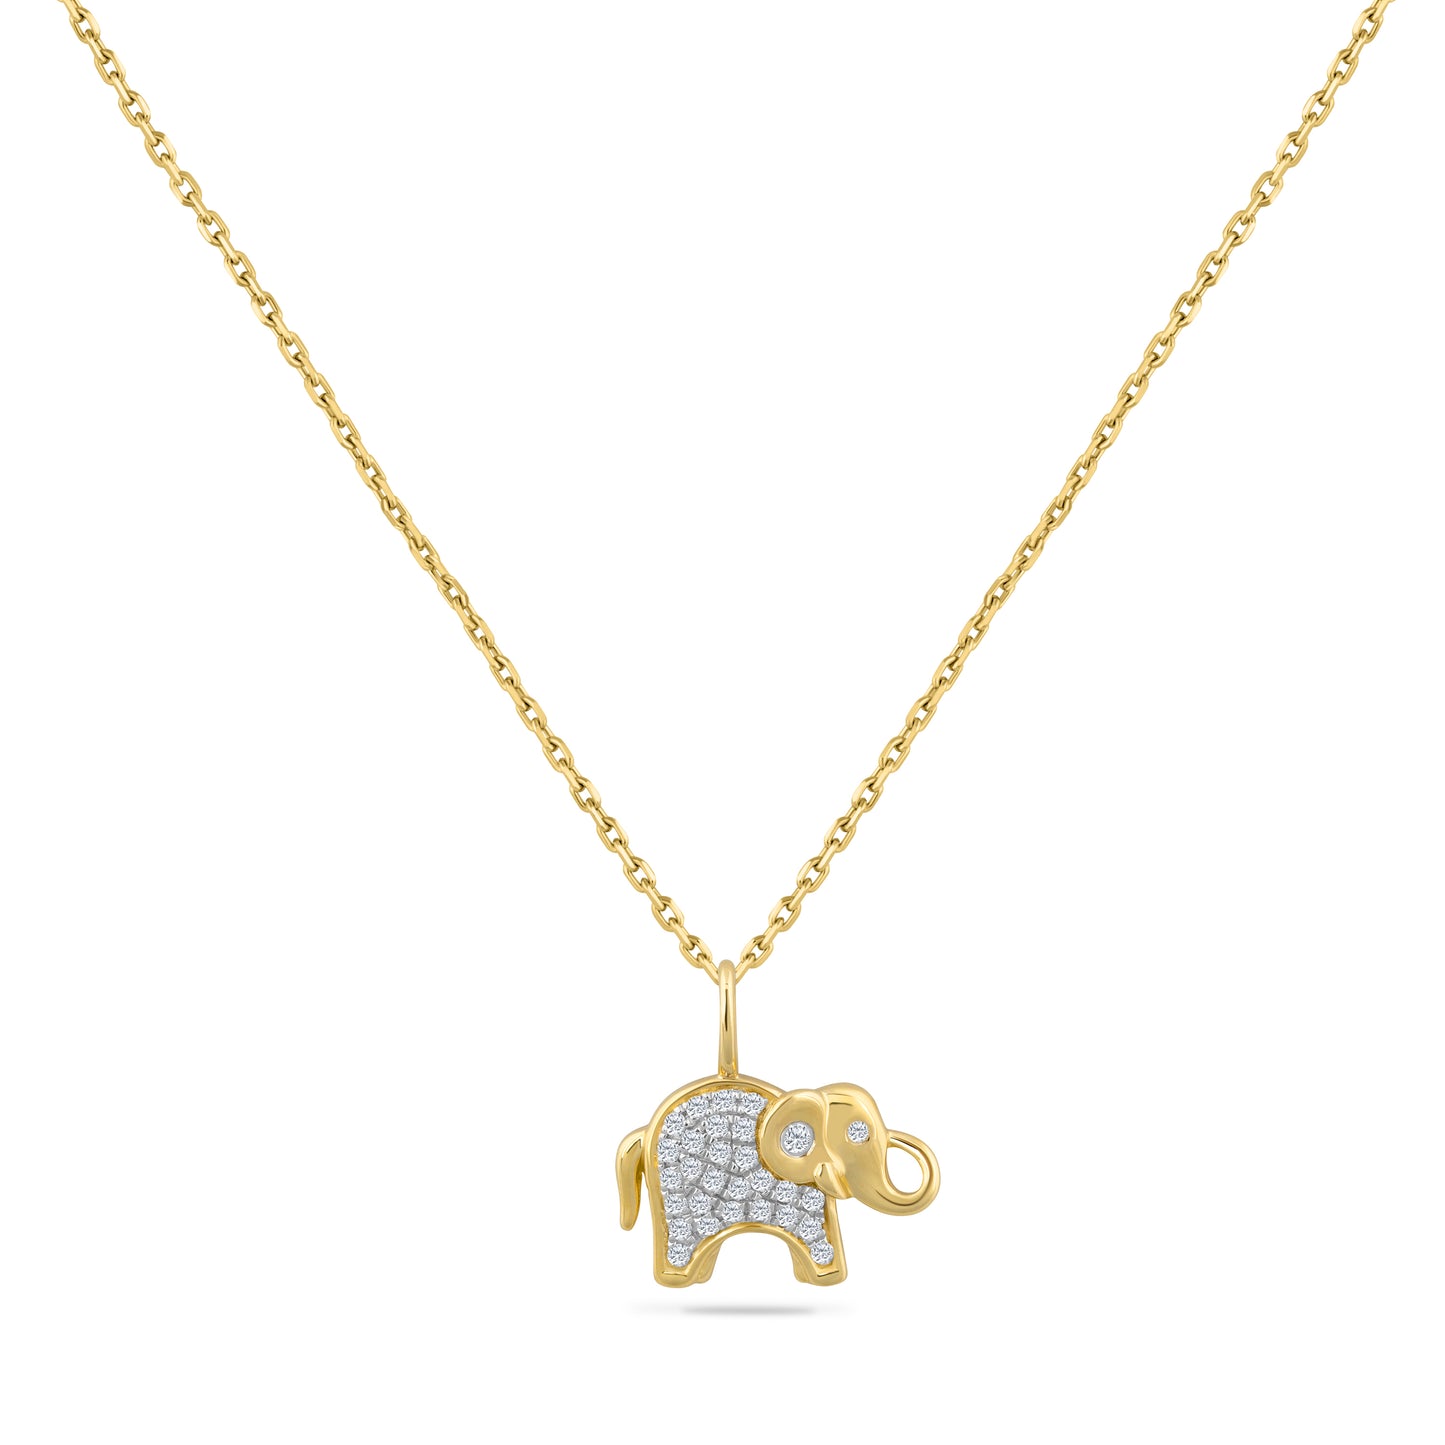 14K ADORABLE BABY ELEPHANT PENDANT WITH 30 DIAMONDS 0.09CT ON 18 INCHES CABLE CHAIN